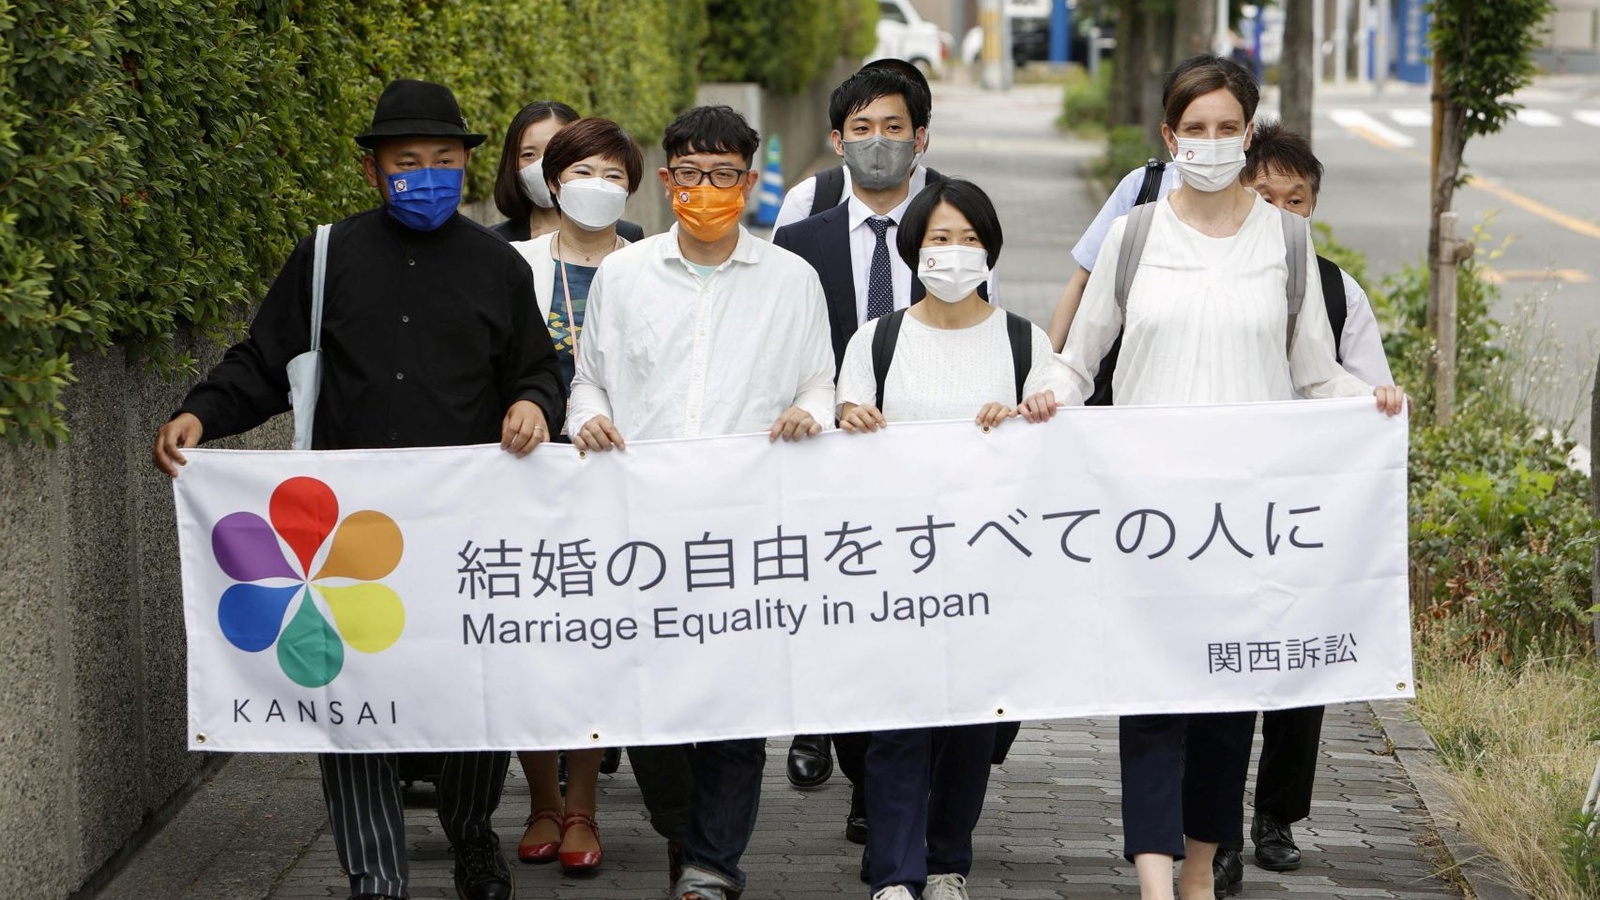 Mixed Messages From Japanese Courts on Same-Sex Marriage Council on Foreign Relations pic